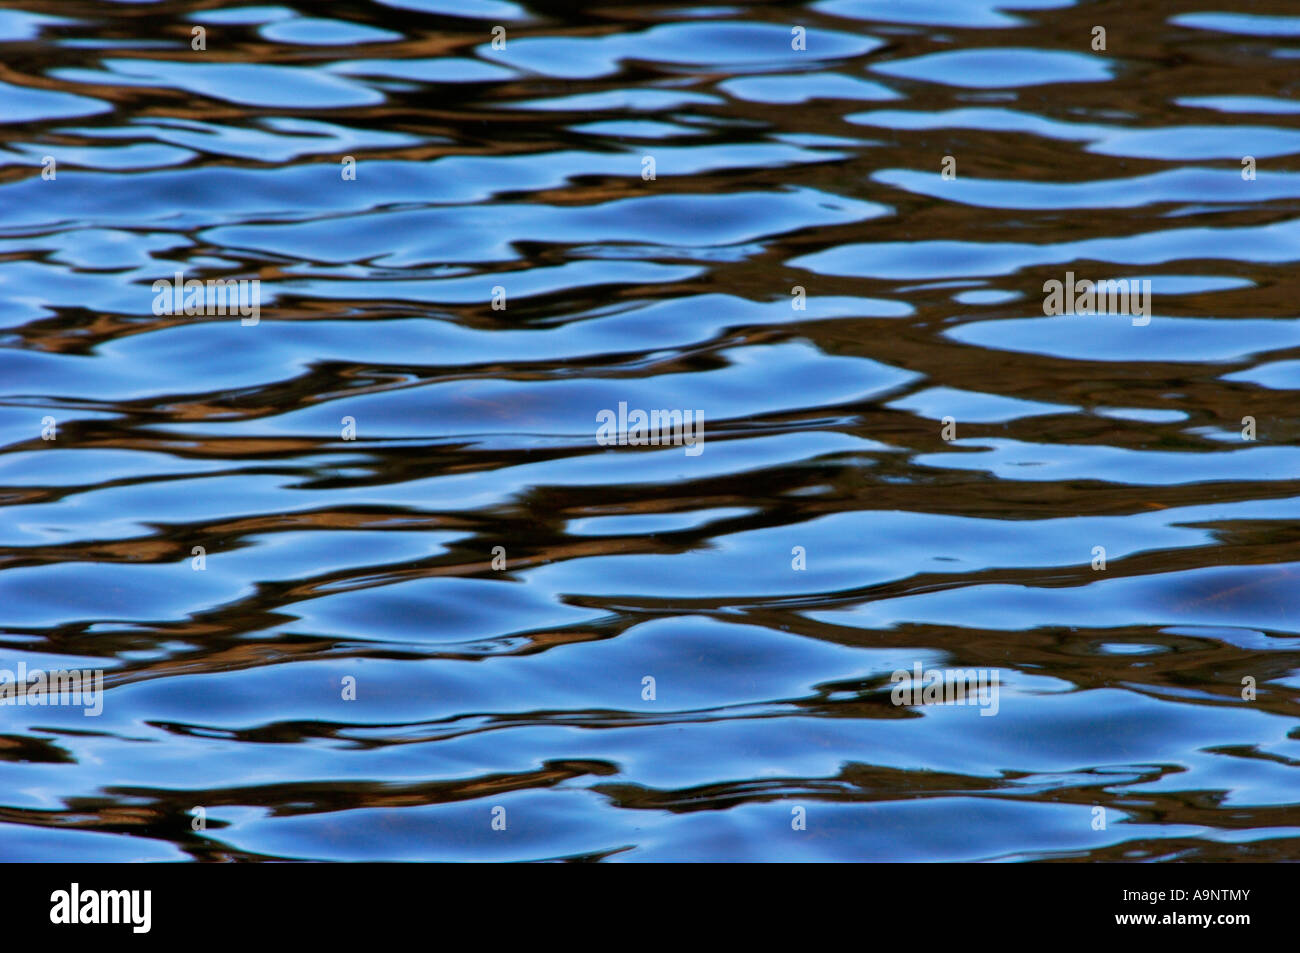 Lovely close up abstract study of ripples on a lake frozen in time and motionless Stock Photo